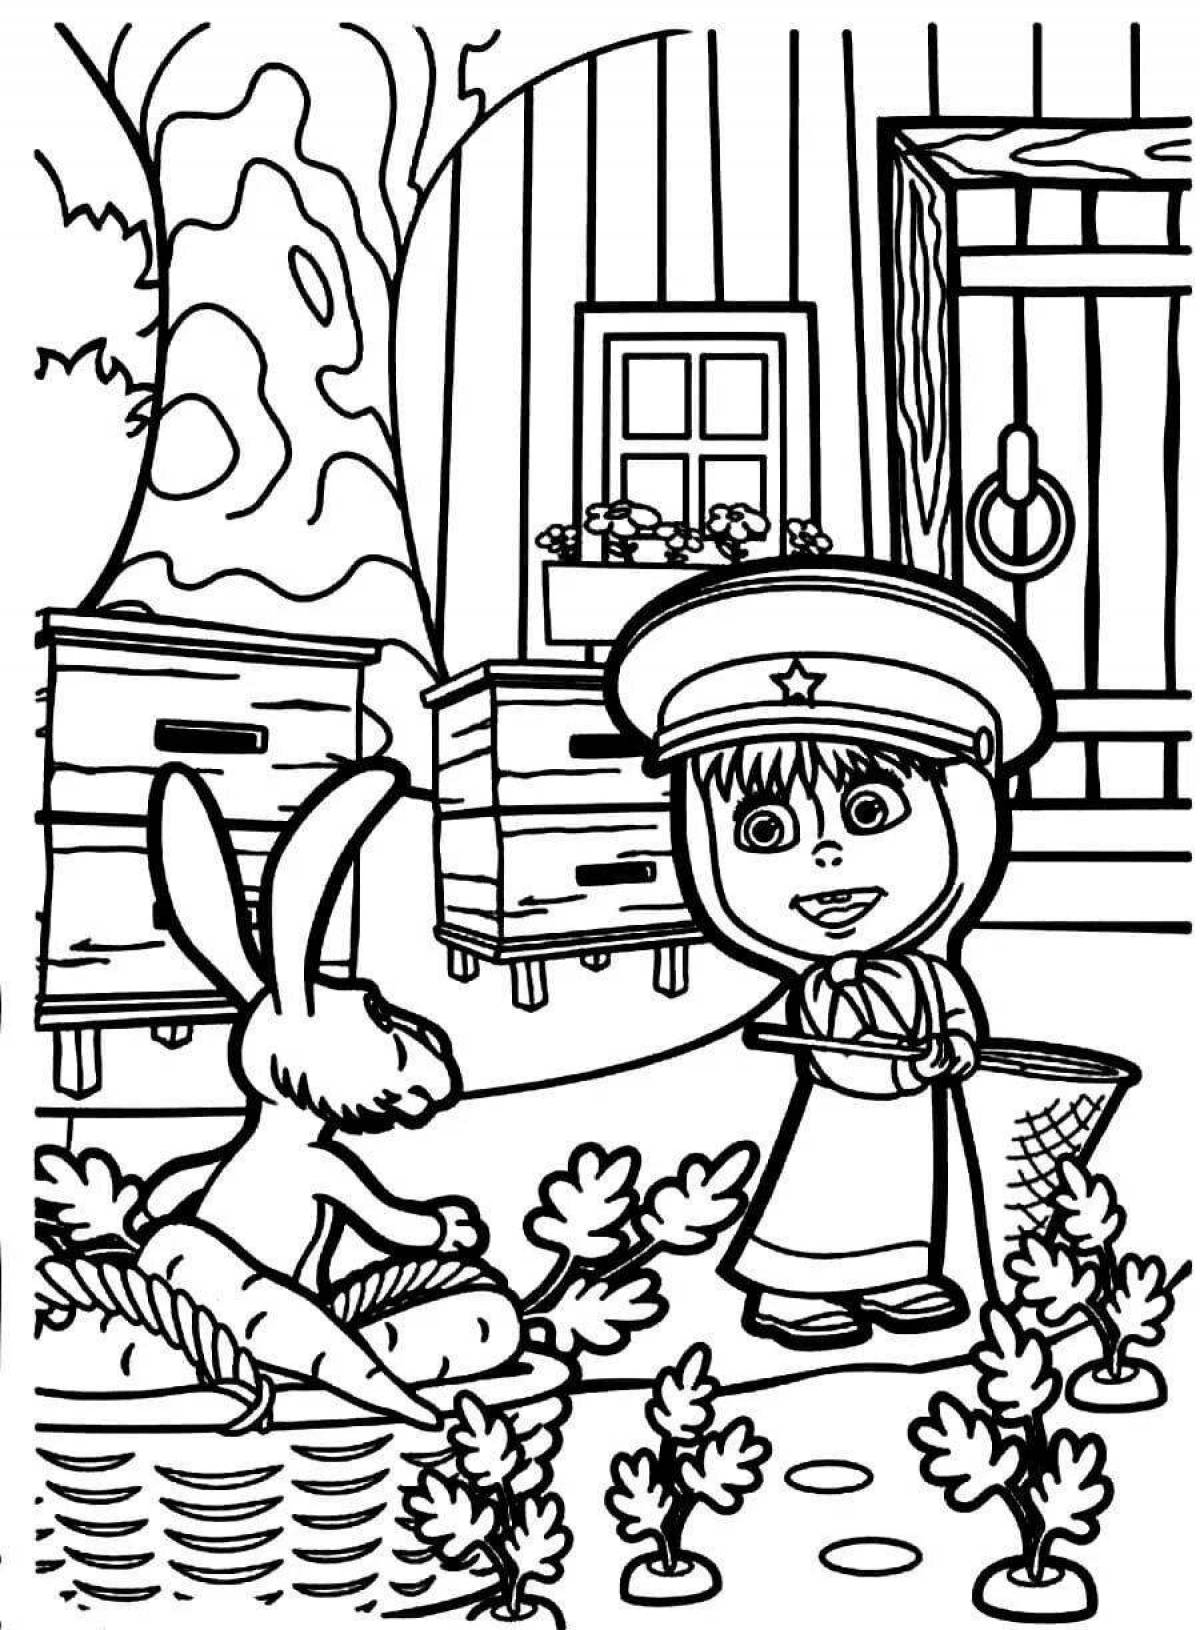 Delightful fever coloring book